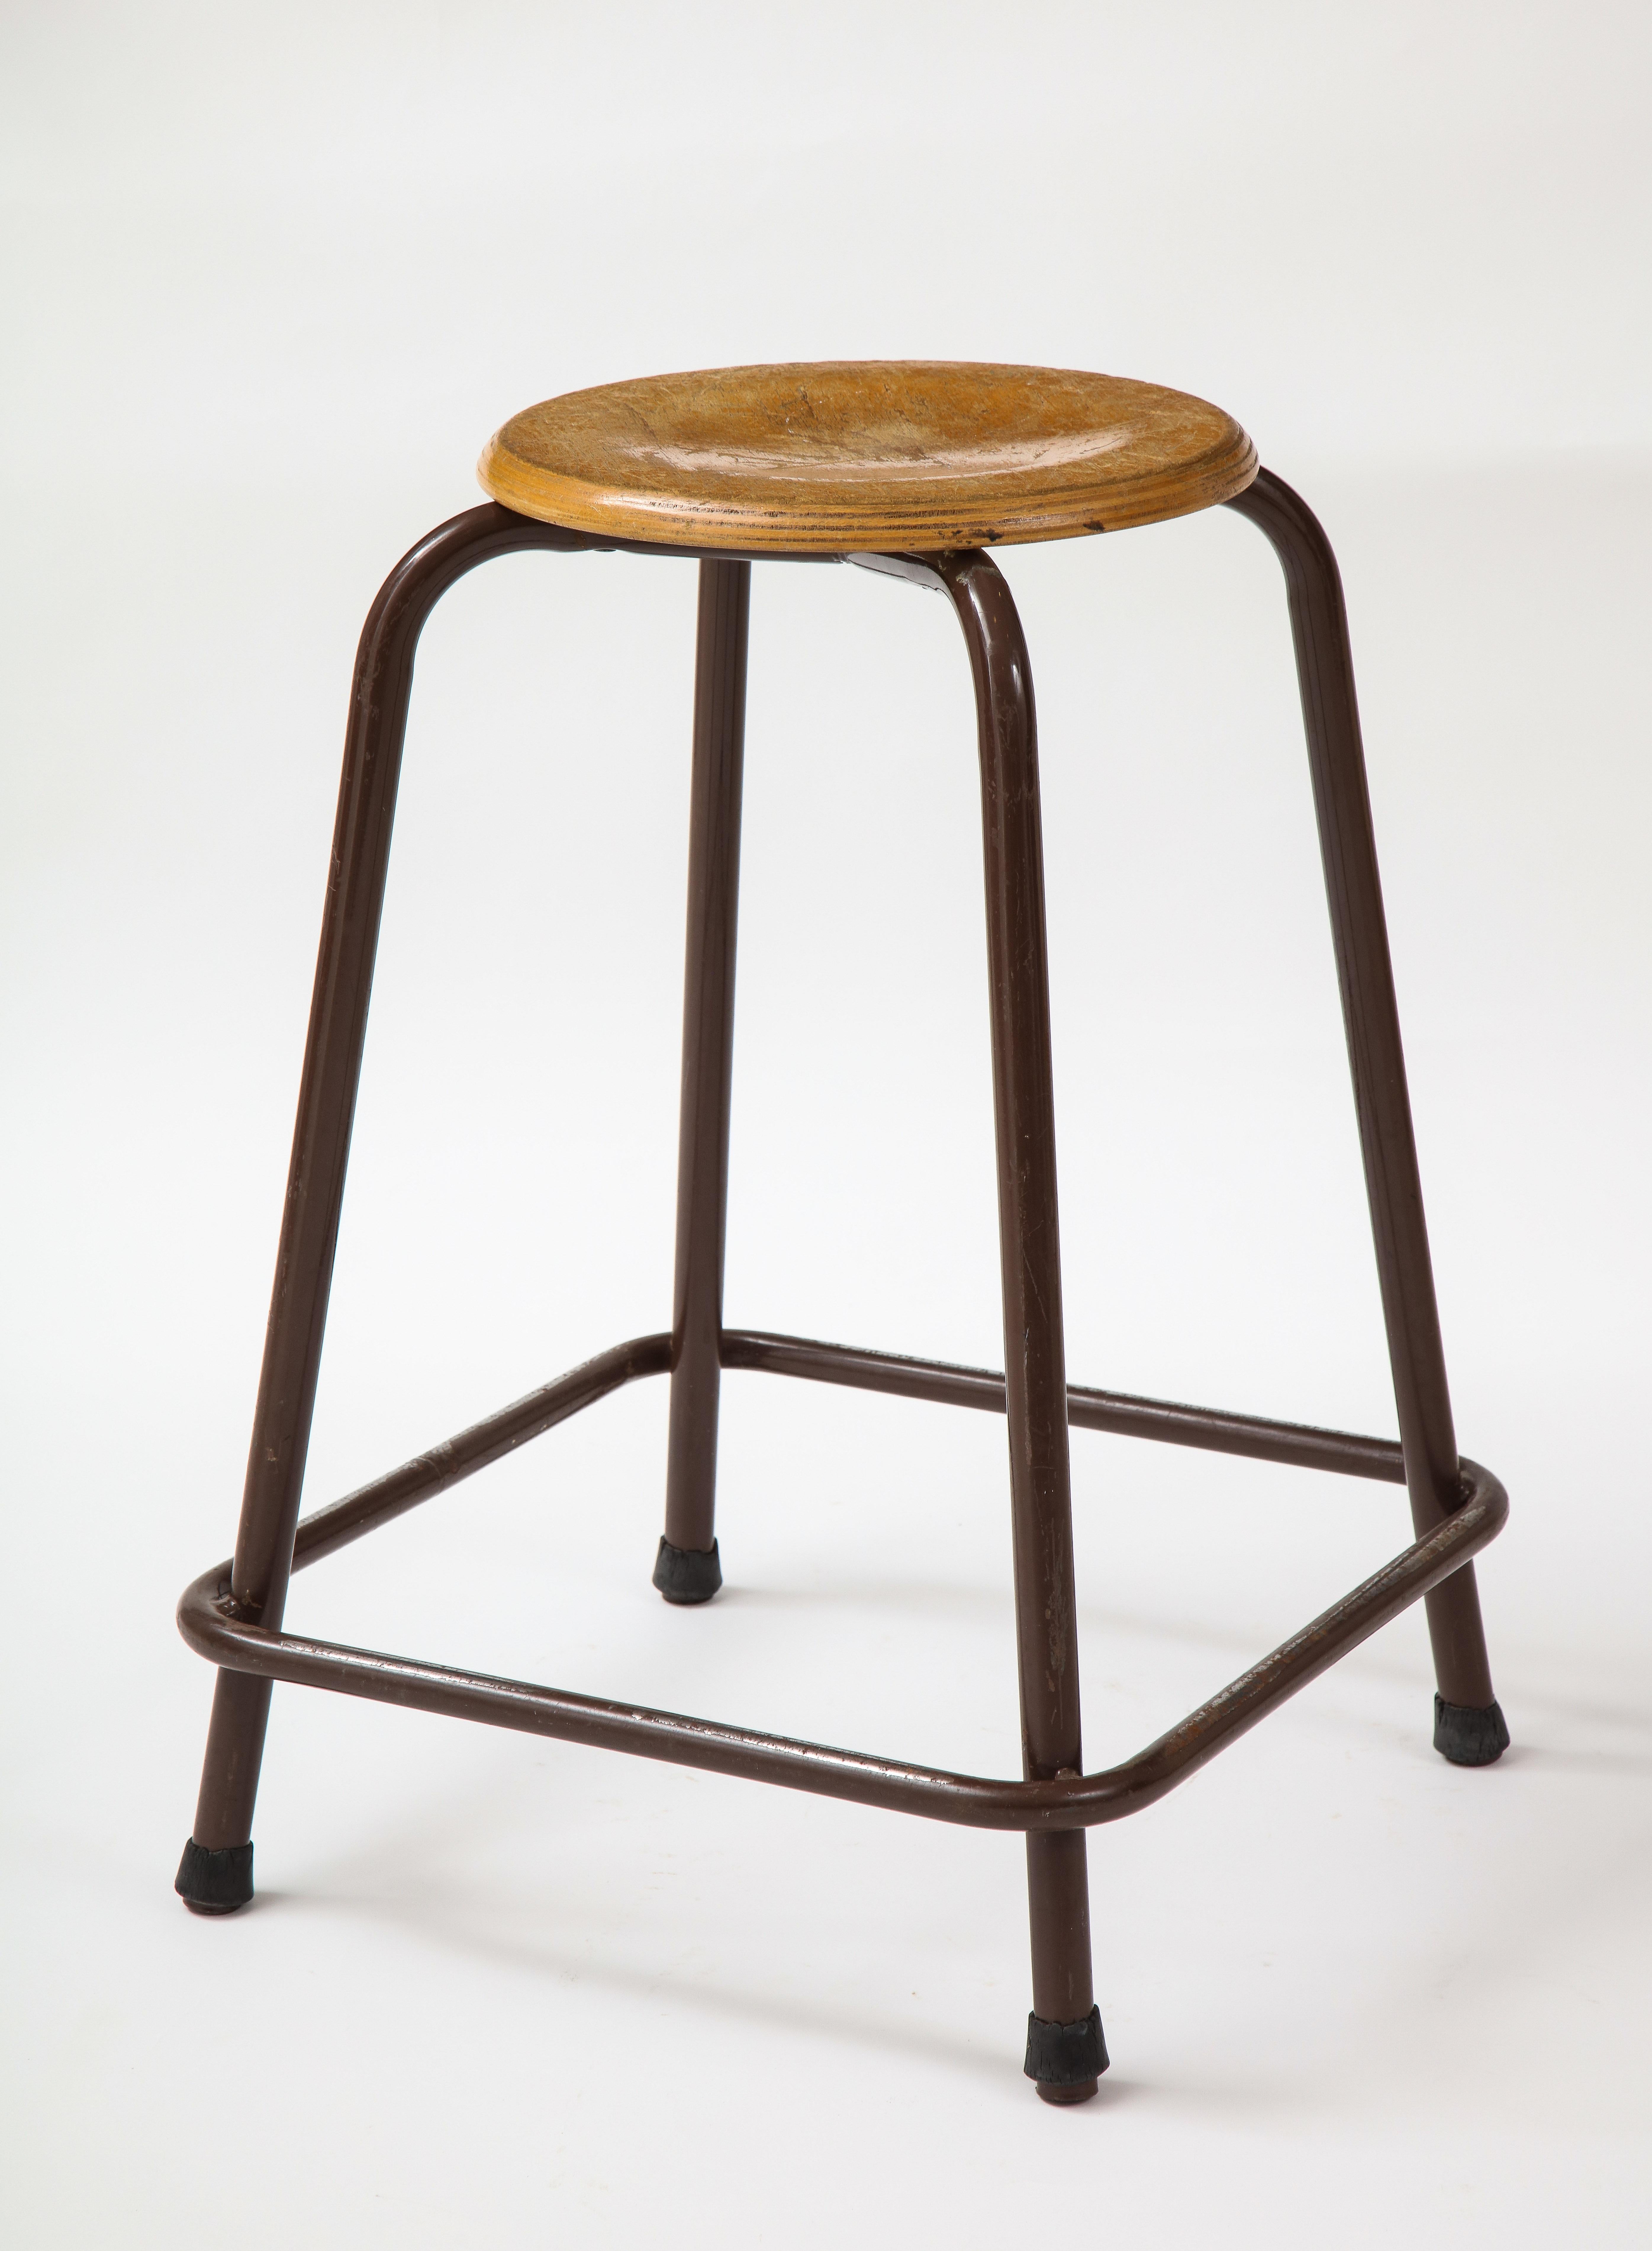 Industrial French Stool with a Wood Seat & Metal Base, c. 1950